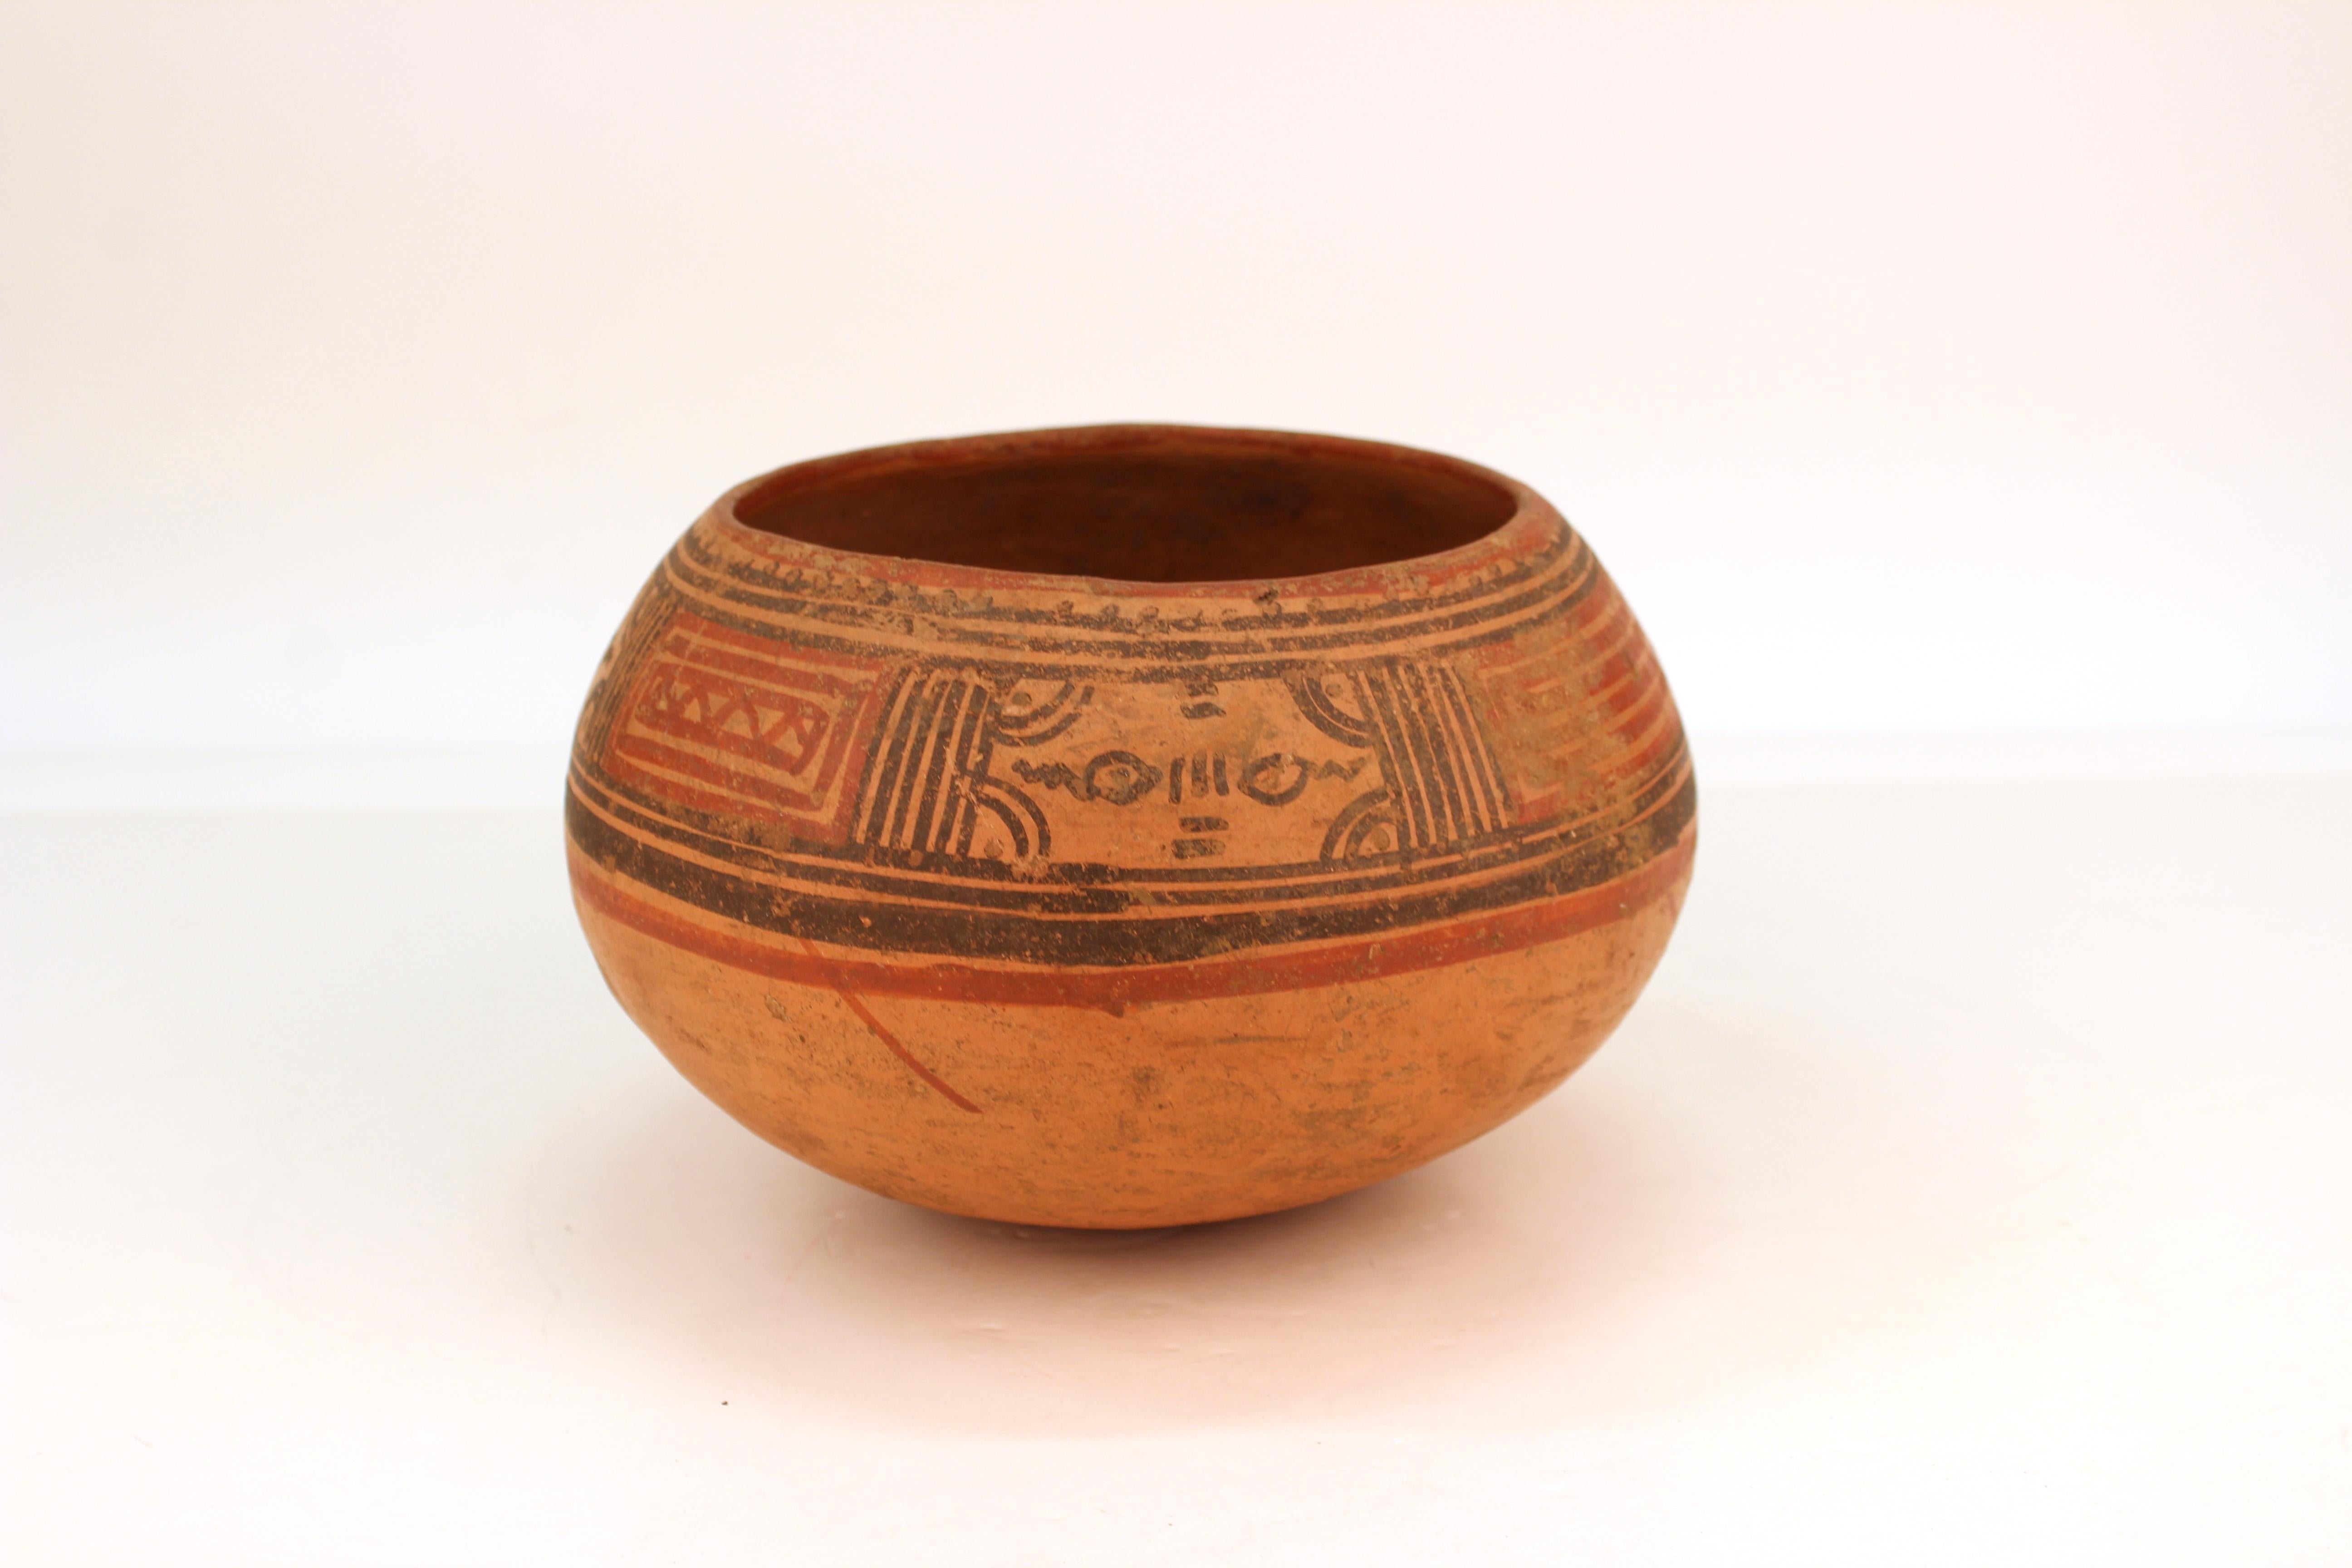 Pre-Columbian Nicoya pottery bowl from Costa Rica, Guanacaste Province, circa 800.
- 1200 CE. A round-bottomed red clay bowl painted with geometric designs and natural pigment decor in red and black. The piece has minor age- and use-related wear.